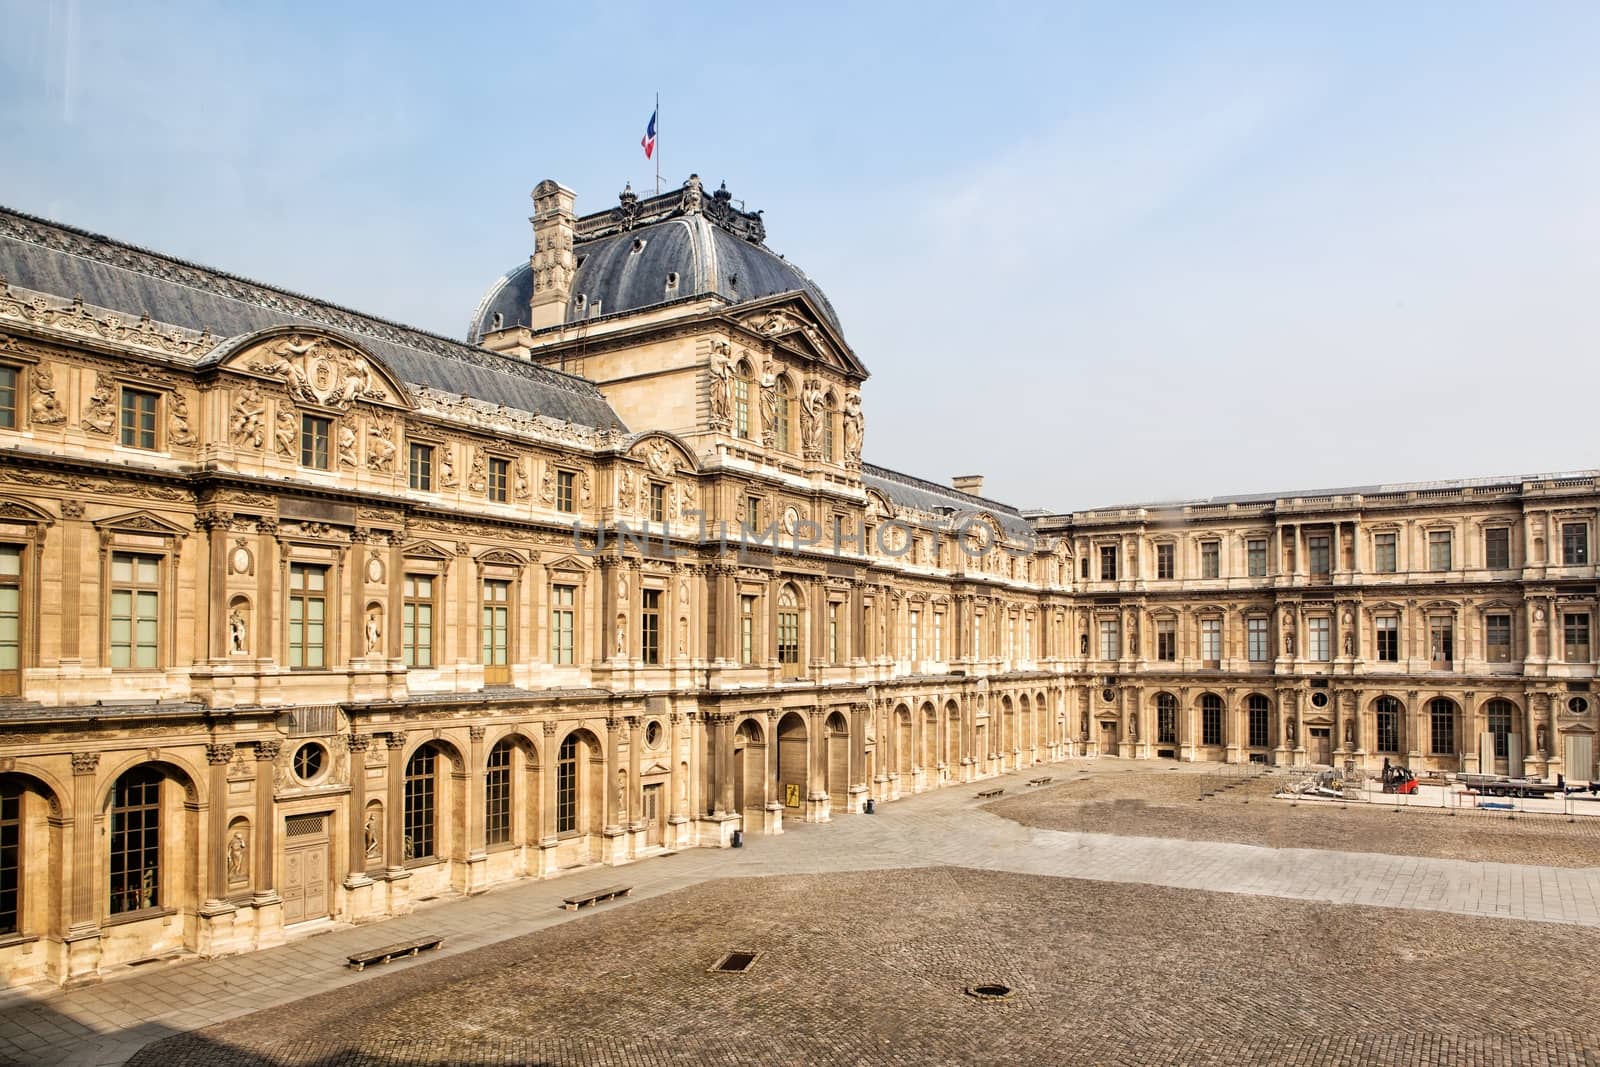 External view of the Louvre Museum (Musee du Louvre) in Paris, France